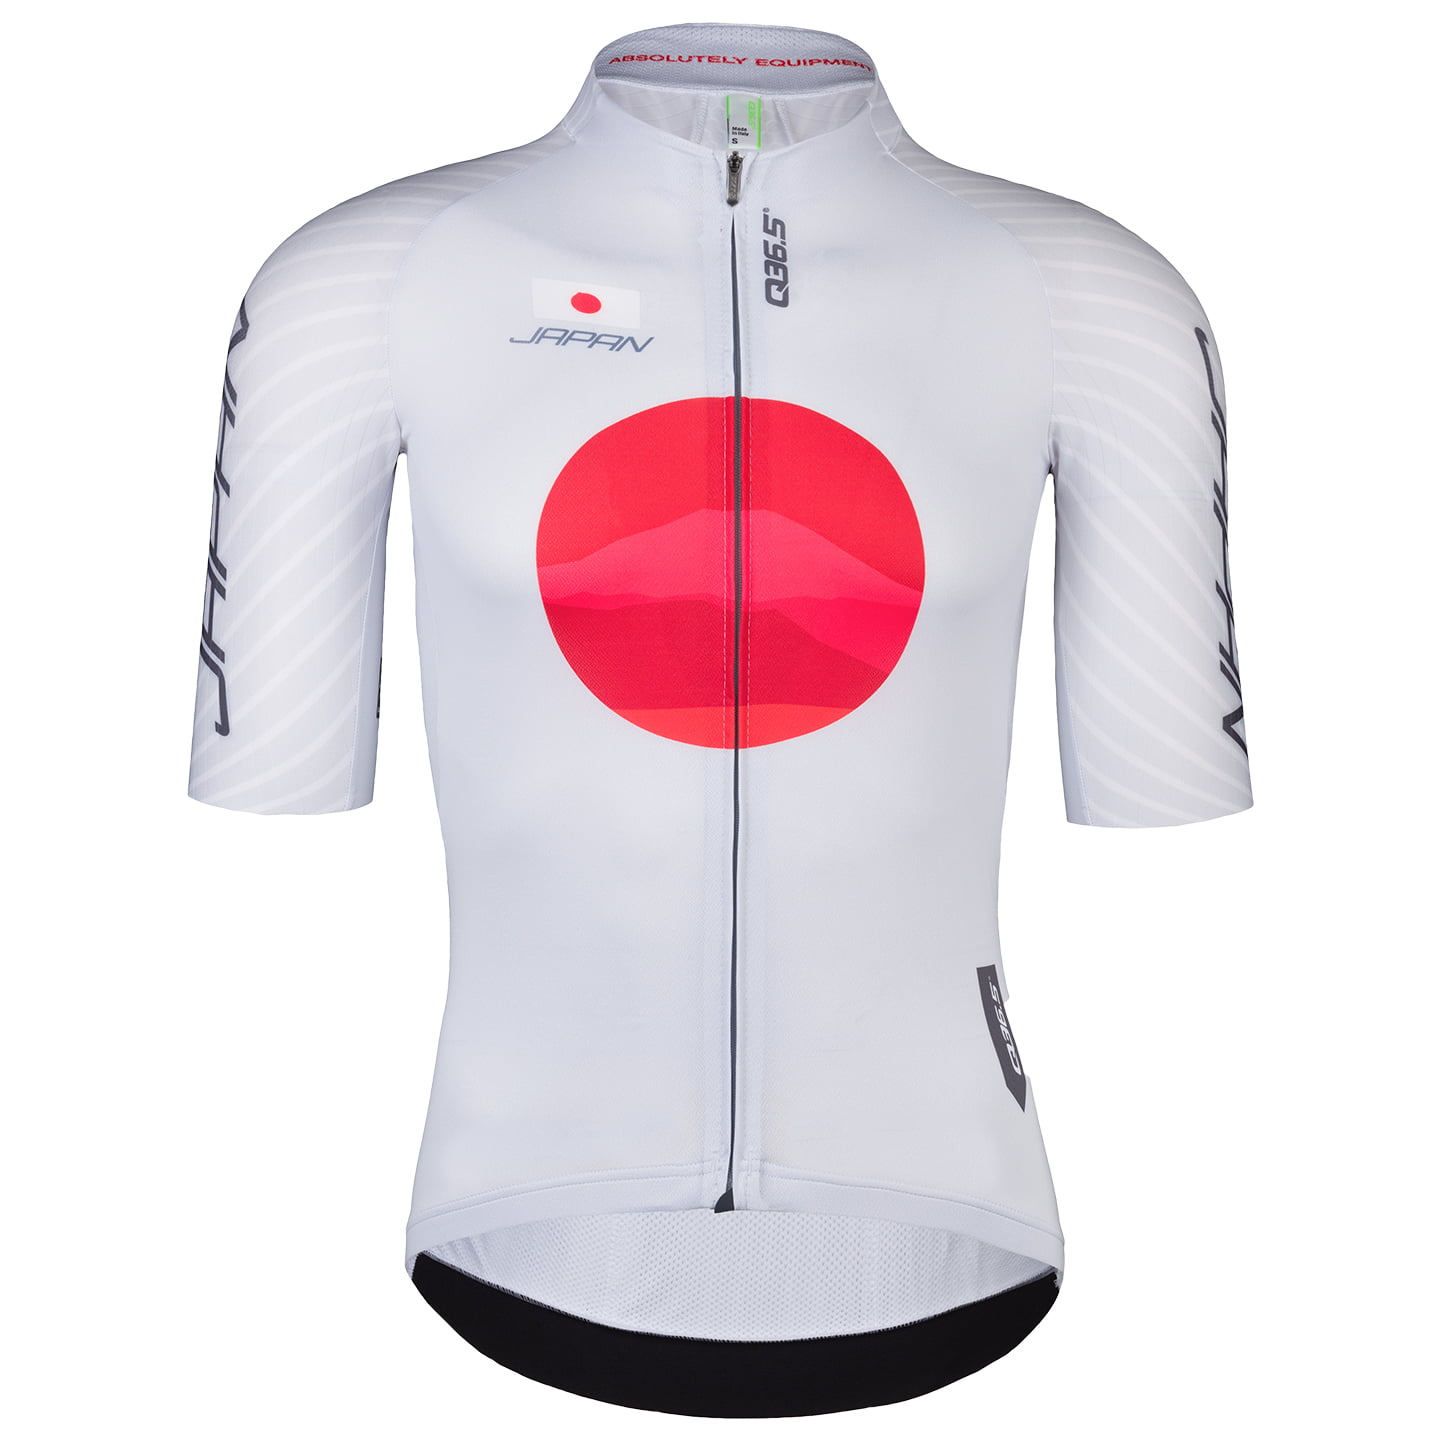 JAPANESE NATIONAL SHORT-SLEEVED JACKET R2 Y 2024 Short Sleeve Jersey, for men, size M, Cycle jersey, Cycling clothing